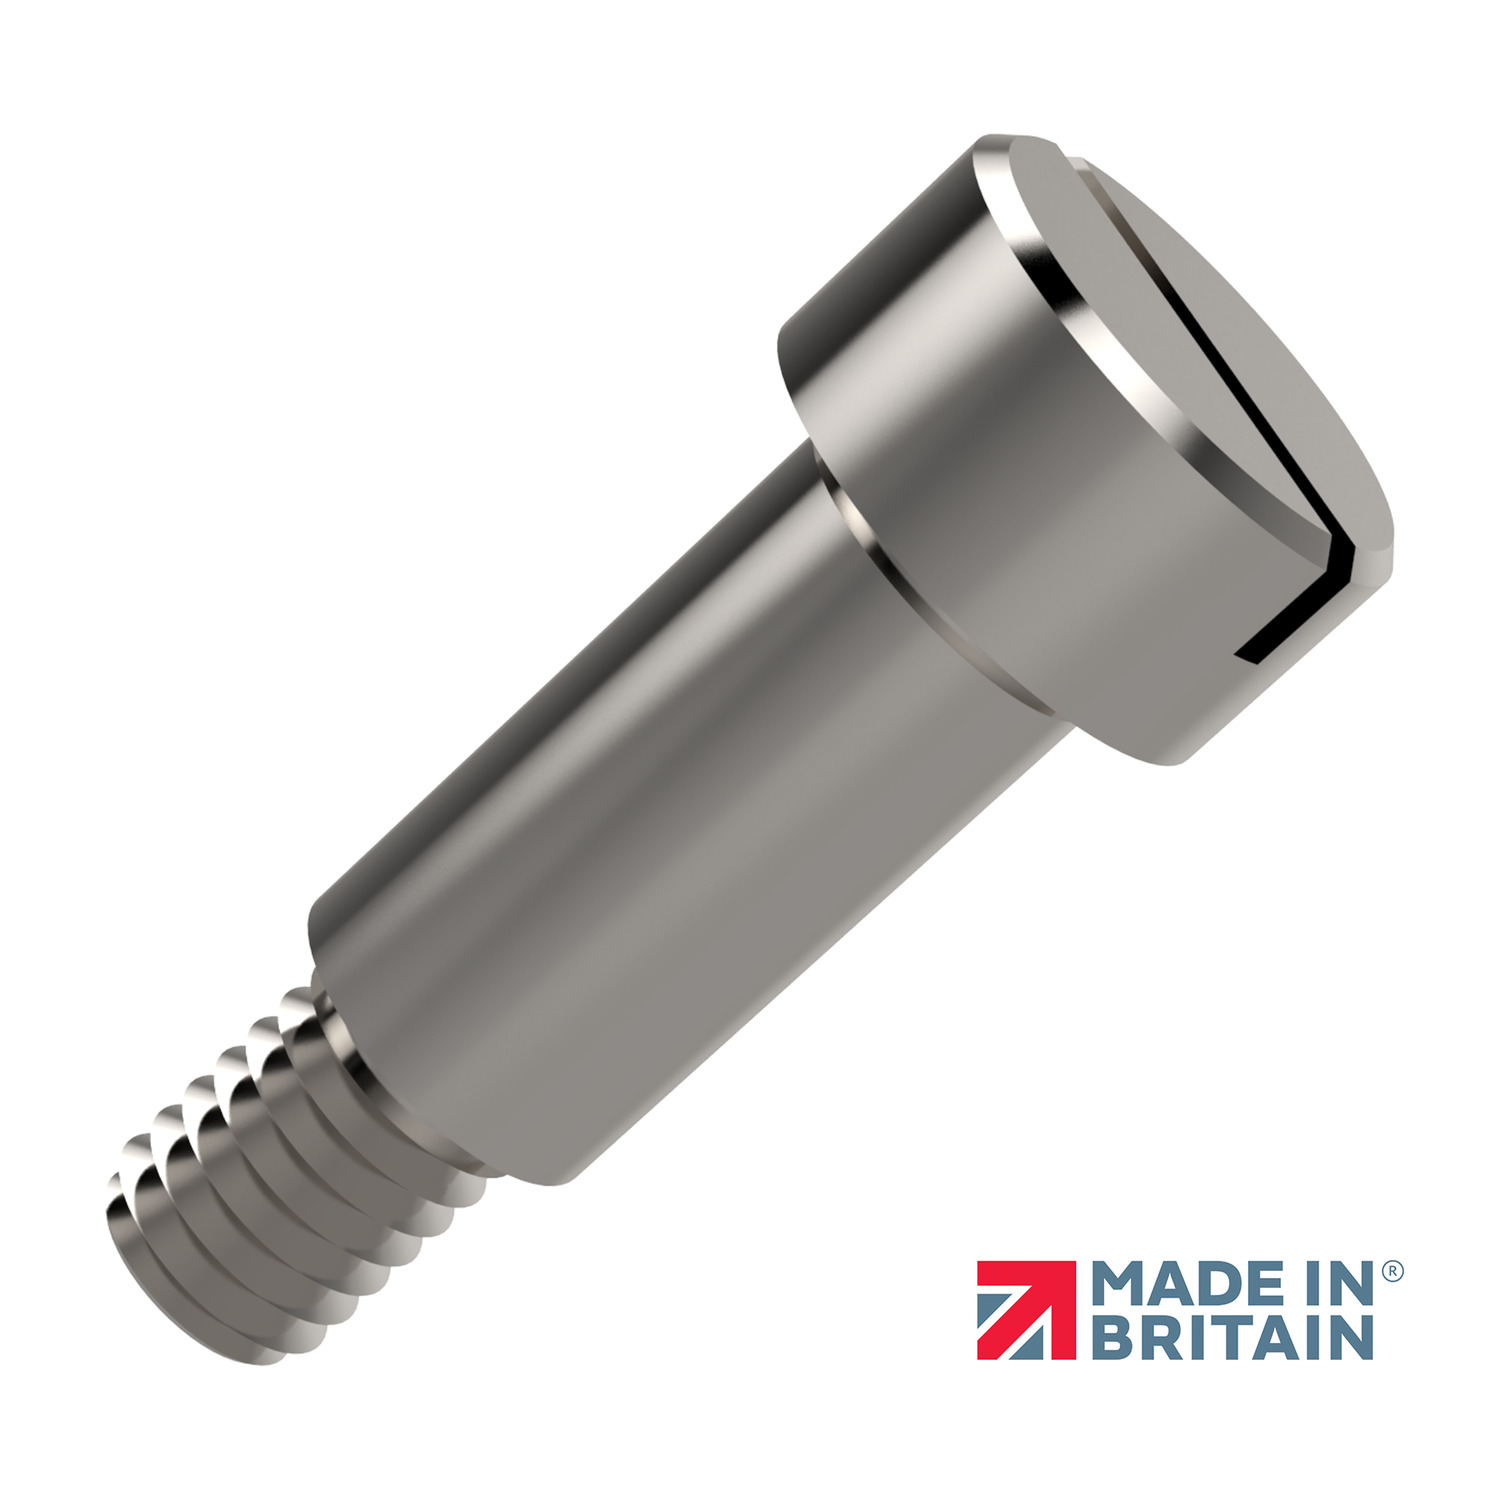 Shoulder Screws - Slot Head Slot head shoulder screw in AISI 416 series stainless steel. Hex drive version also in stock (P0131). This product is also manufactured in 303 and 316 series stainless steel (P0130). See our shoulder screw range here.